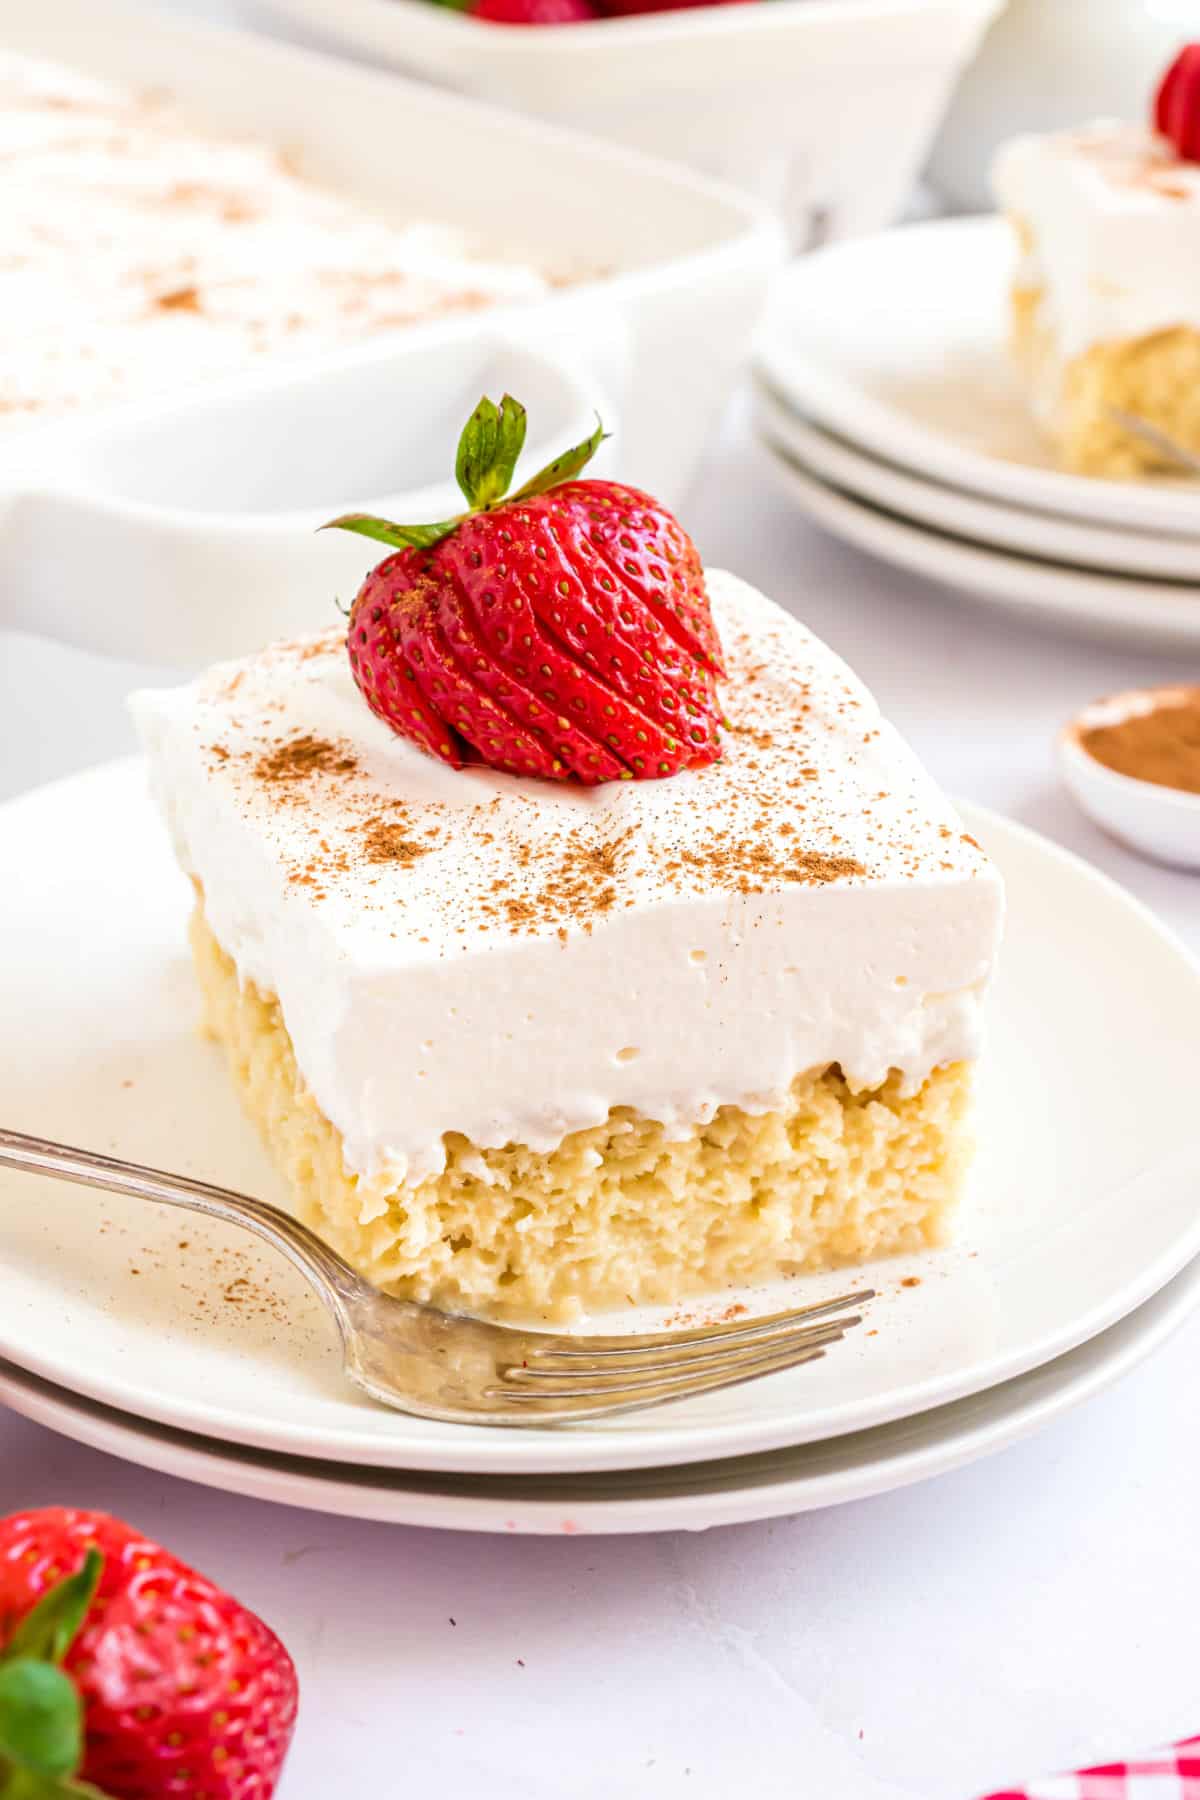 Slice of tres leches cake garnished with a fresh strawberry on a white plate.